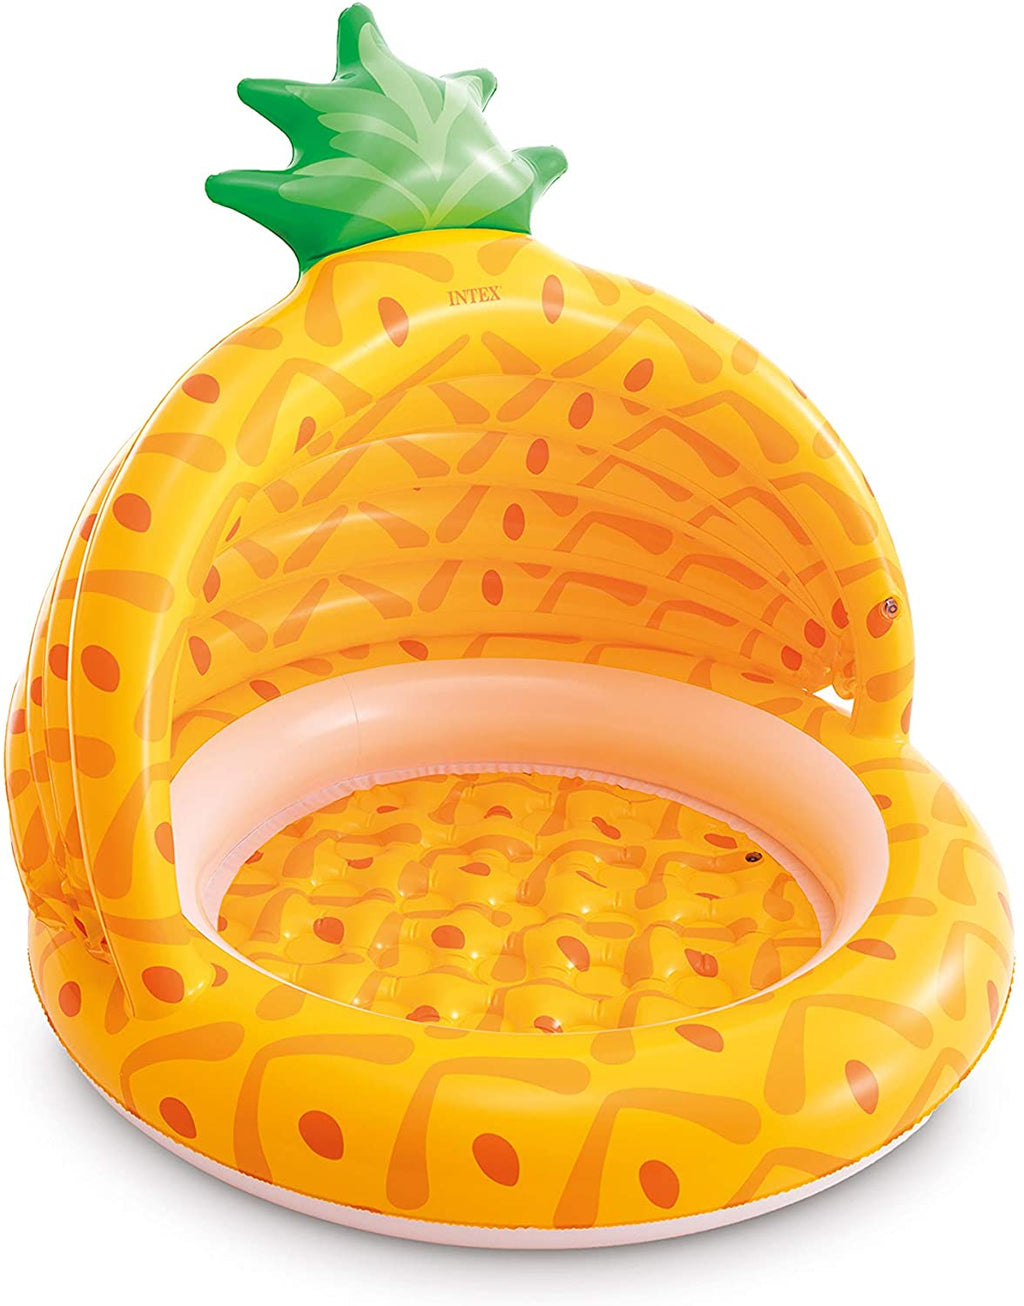 The Beach Company online - Inflatable Pool Floats online - kids pool island online - discount beach floats and toys online India - umbrella float pool - pineapple float - baby pool - paddle pool 